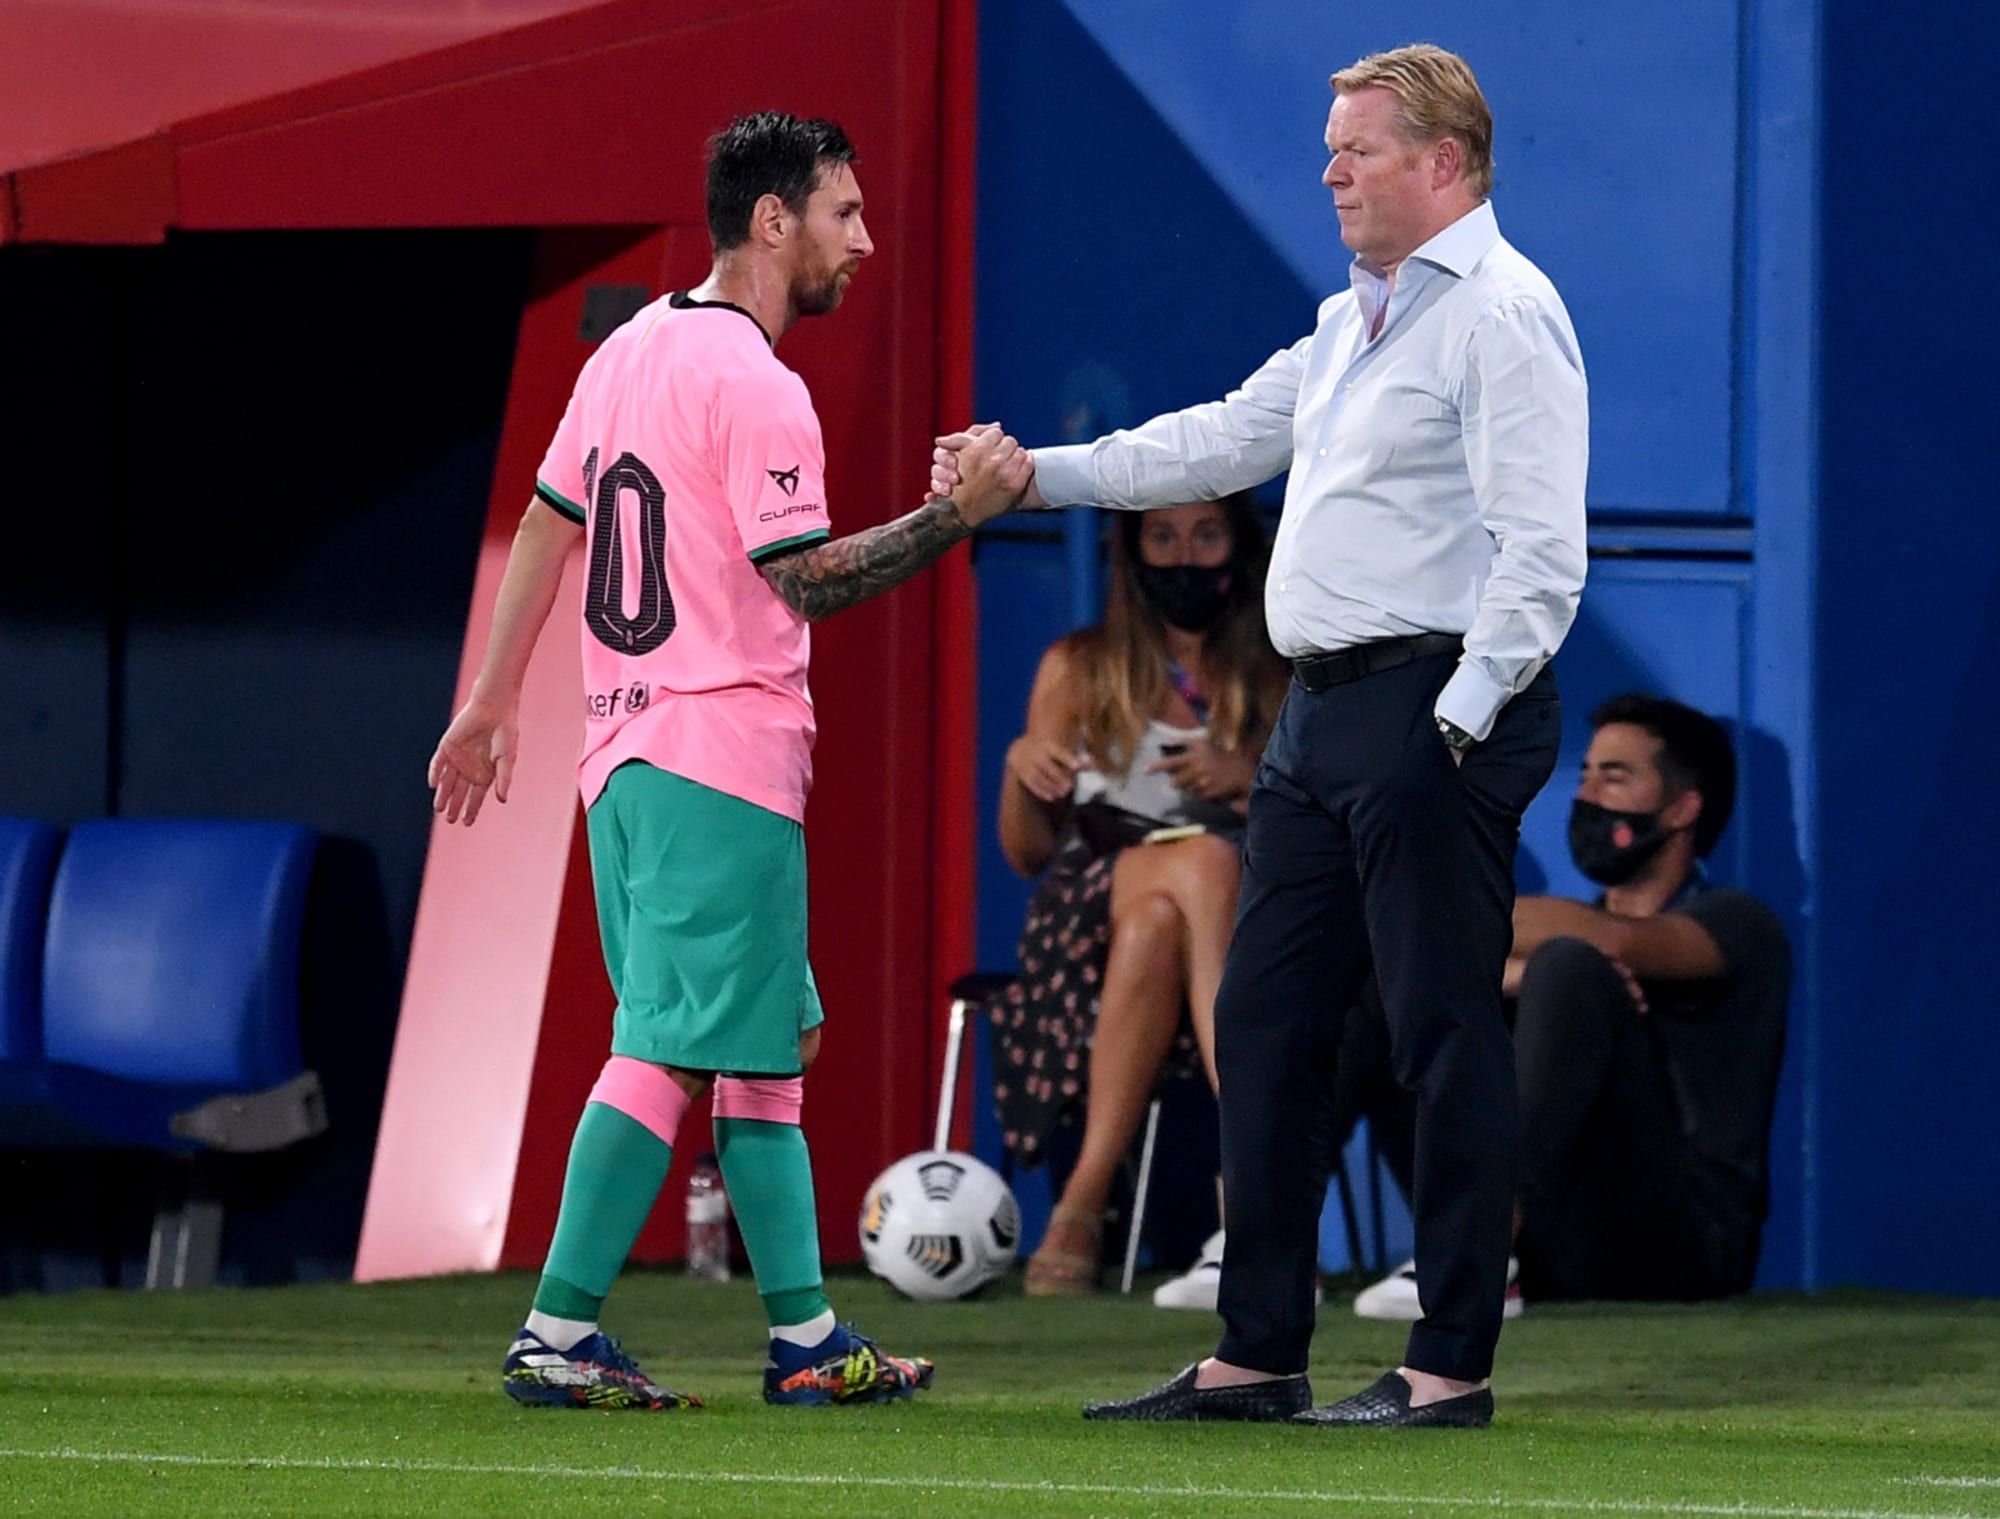 Koeman slams Quique Setien on his nasty opinion about Lionel Messi